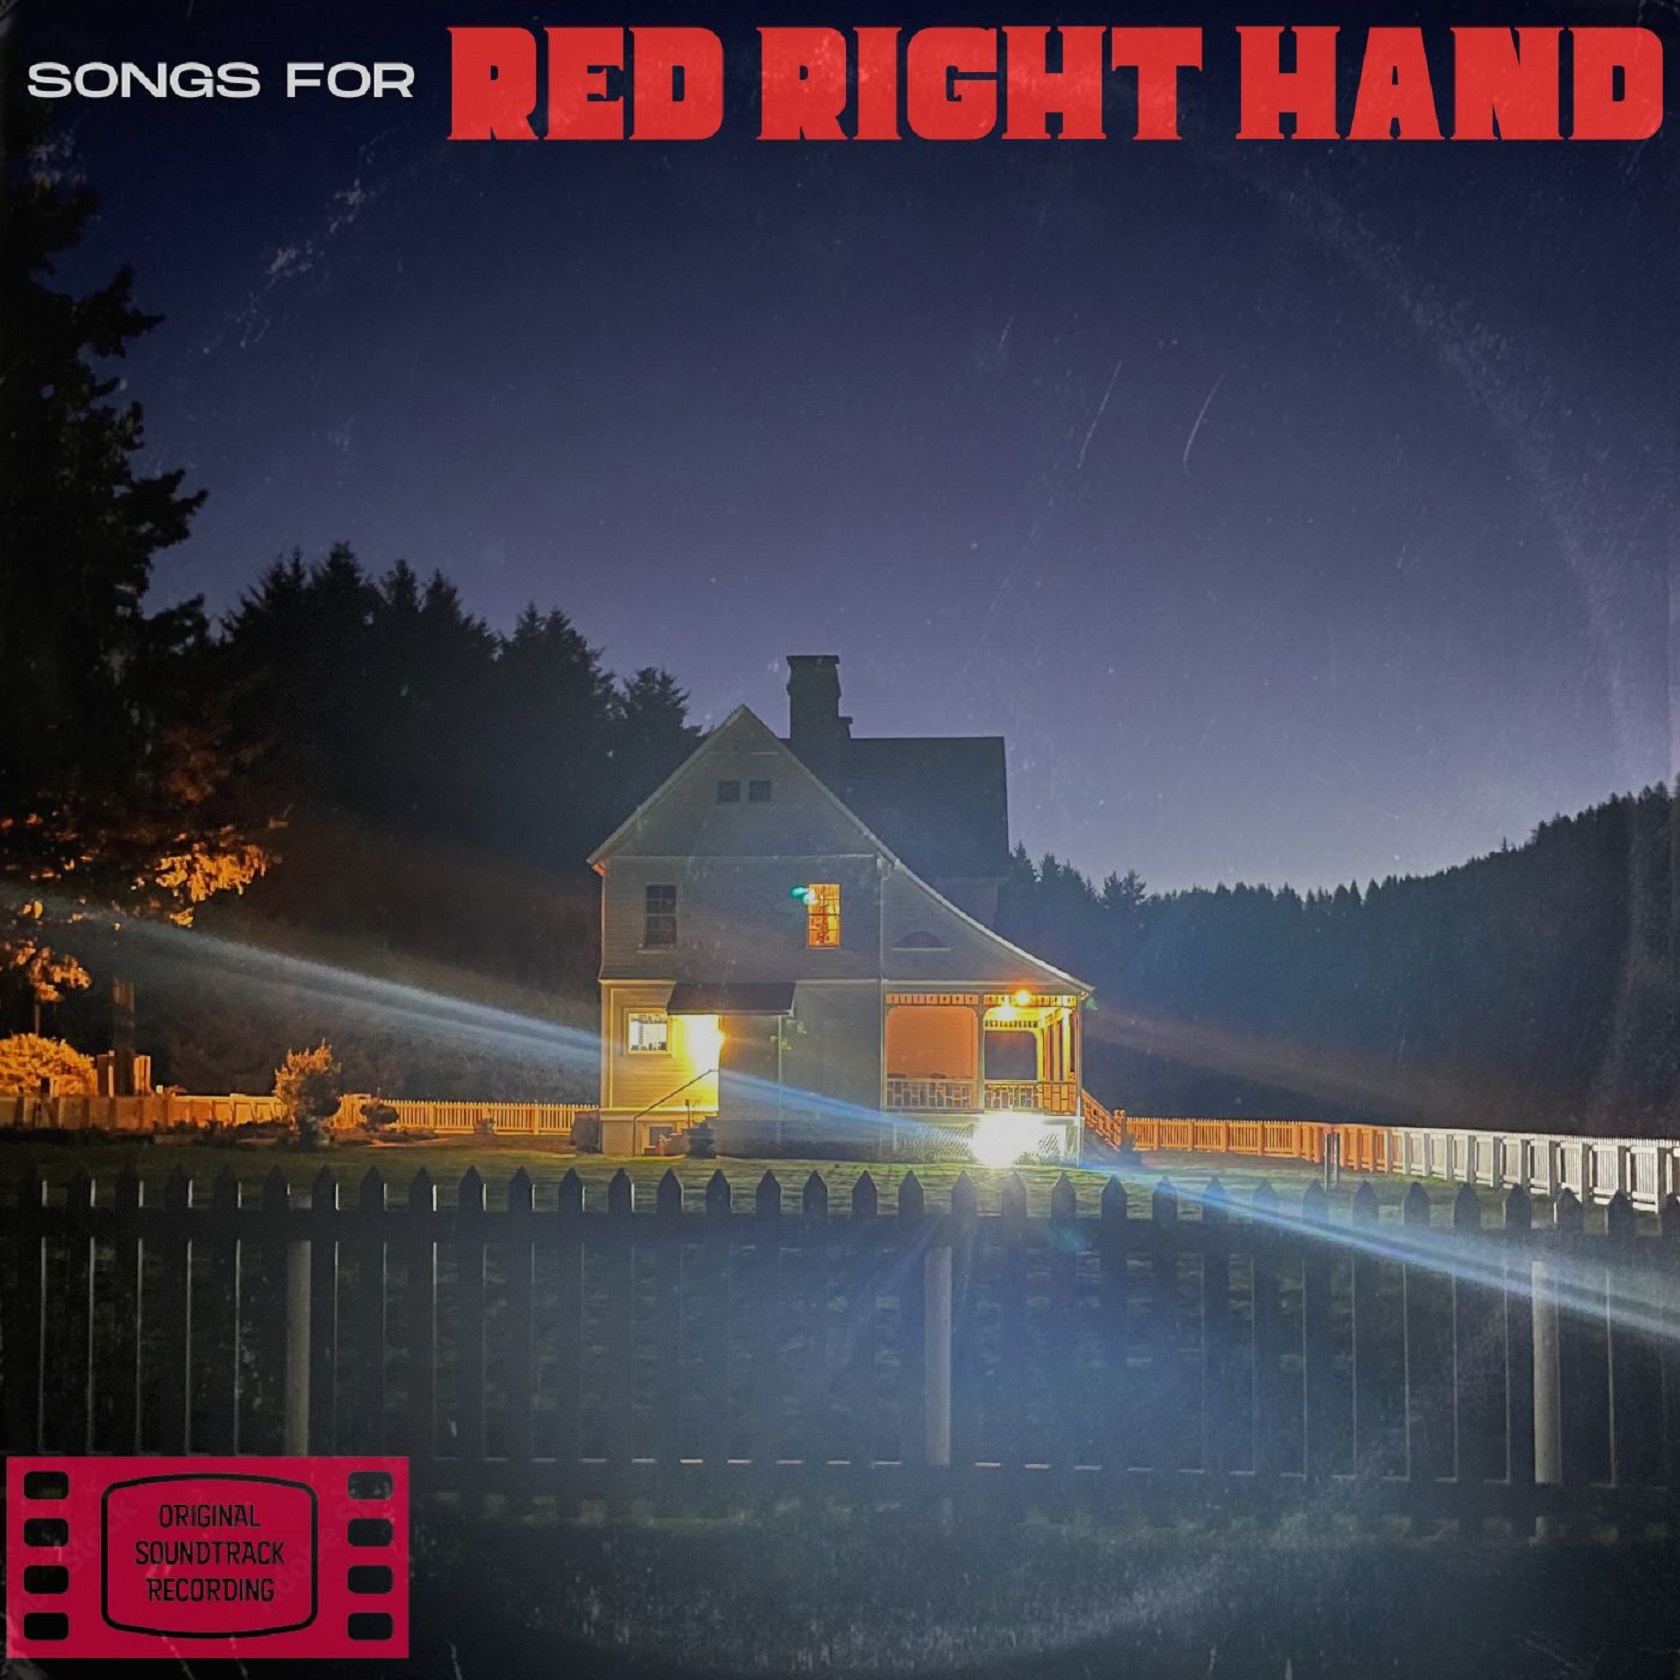 Seattle's Peter Donovan Releases New Music Written and Recorded for Red Right Hand, staring Orlando Bloom and Andie MacDowell, out now via Magnolia Pictures